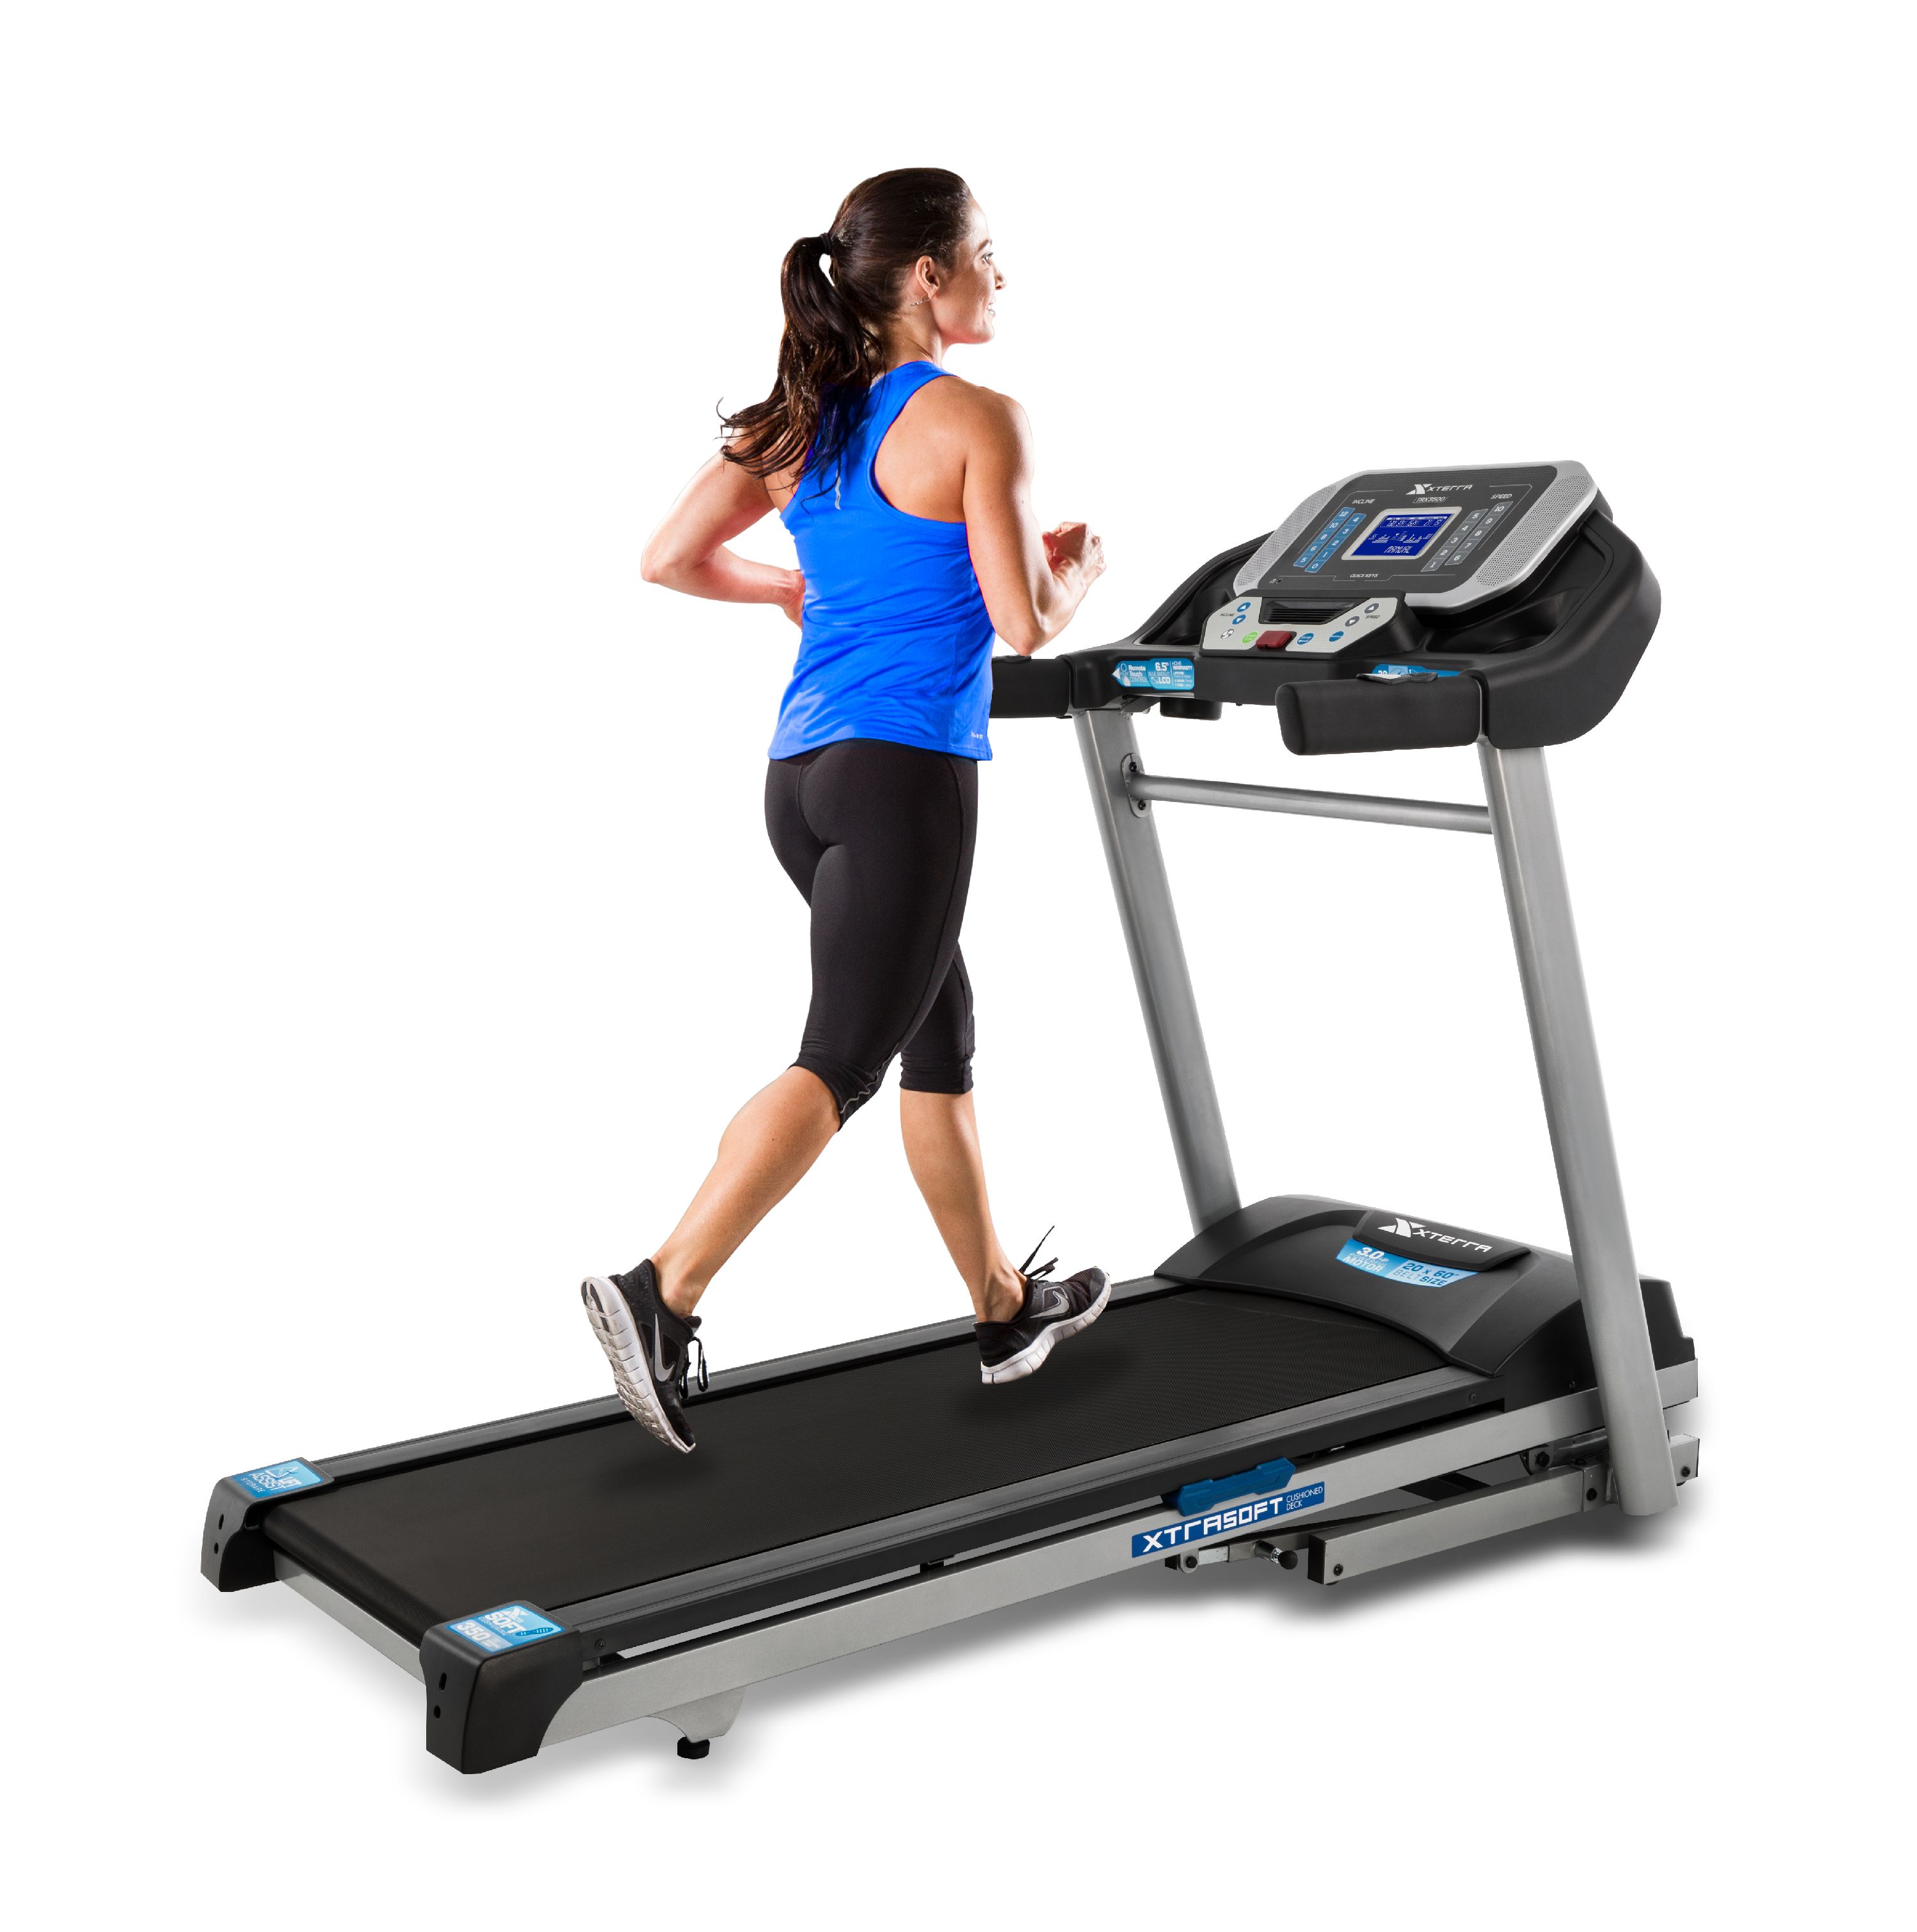 XTERRA TRX3500 Folding Motorized Treadmill with Bluetooth FTMS, Handlebar Control Buttons, Built-In Speaker and Audio-Jack - image 1 of 9